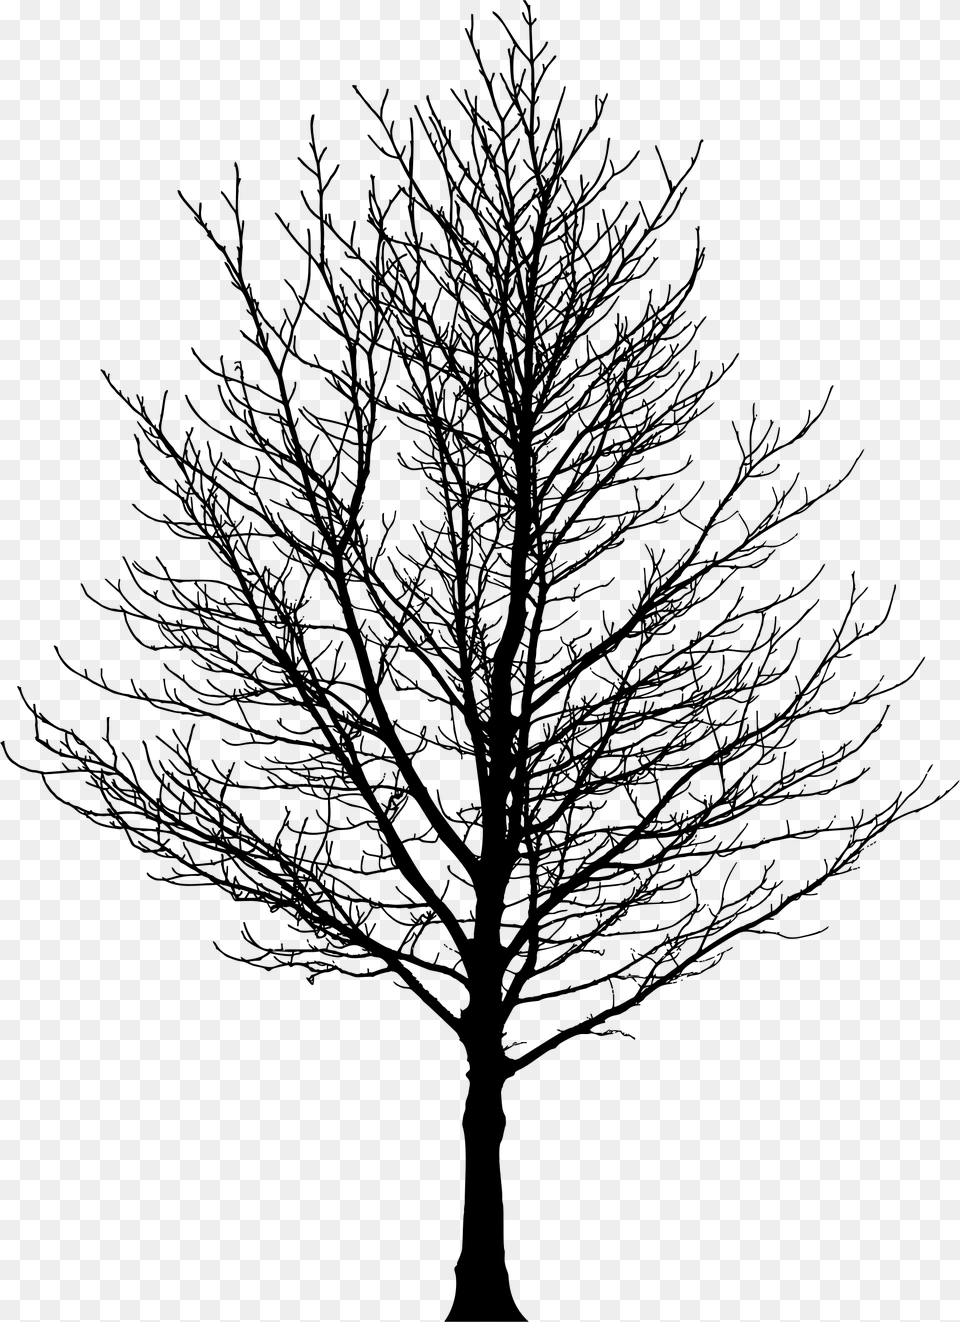 This Icons Design Of Barren Tree Silhouette, Gray Free Png